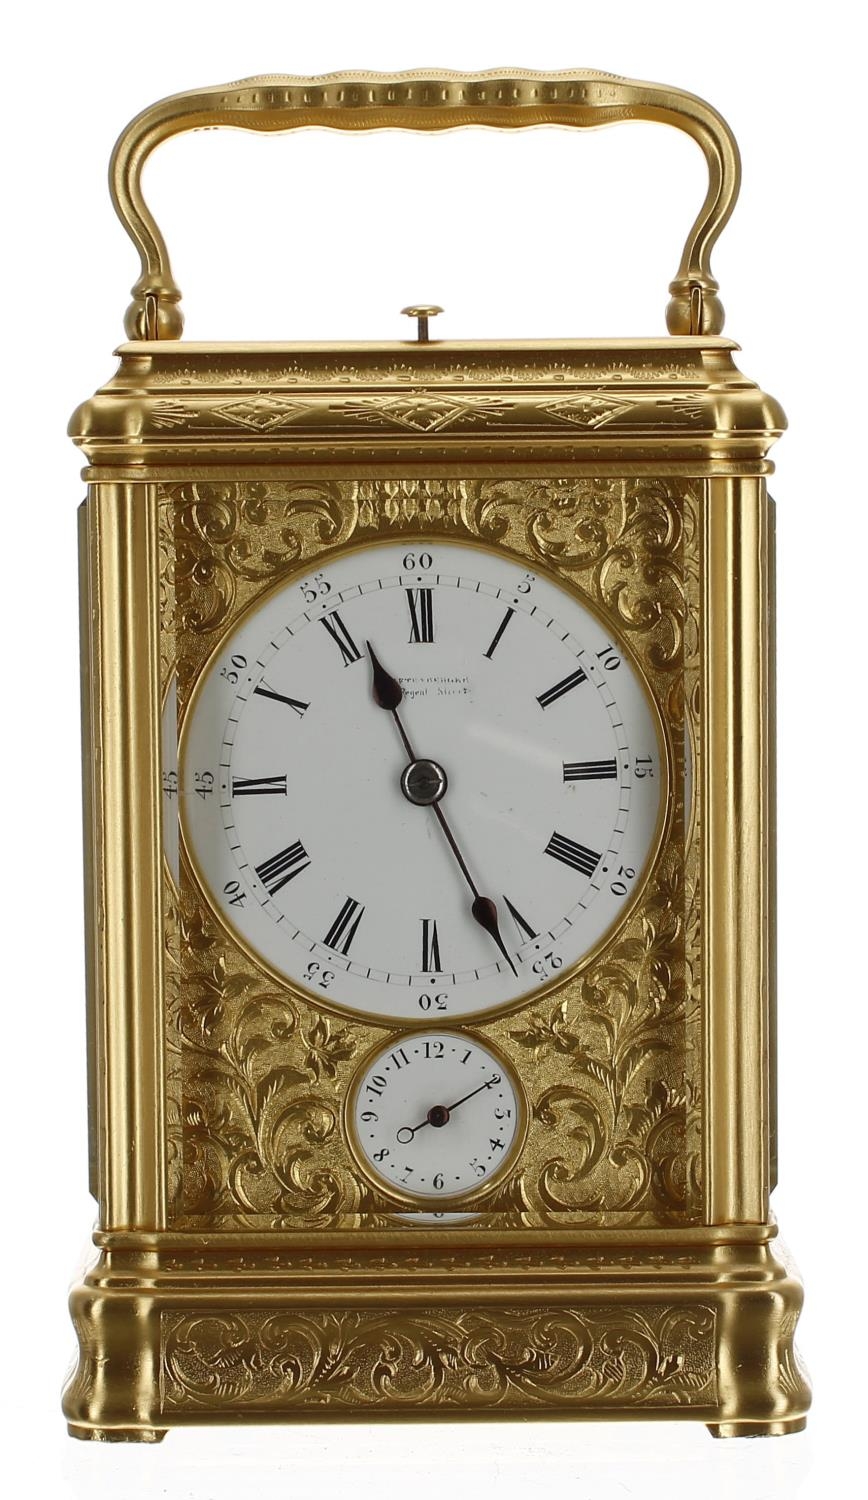 Fine Grande Sonnerie repeater carriage clock with alarm, the movement back plate stamped